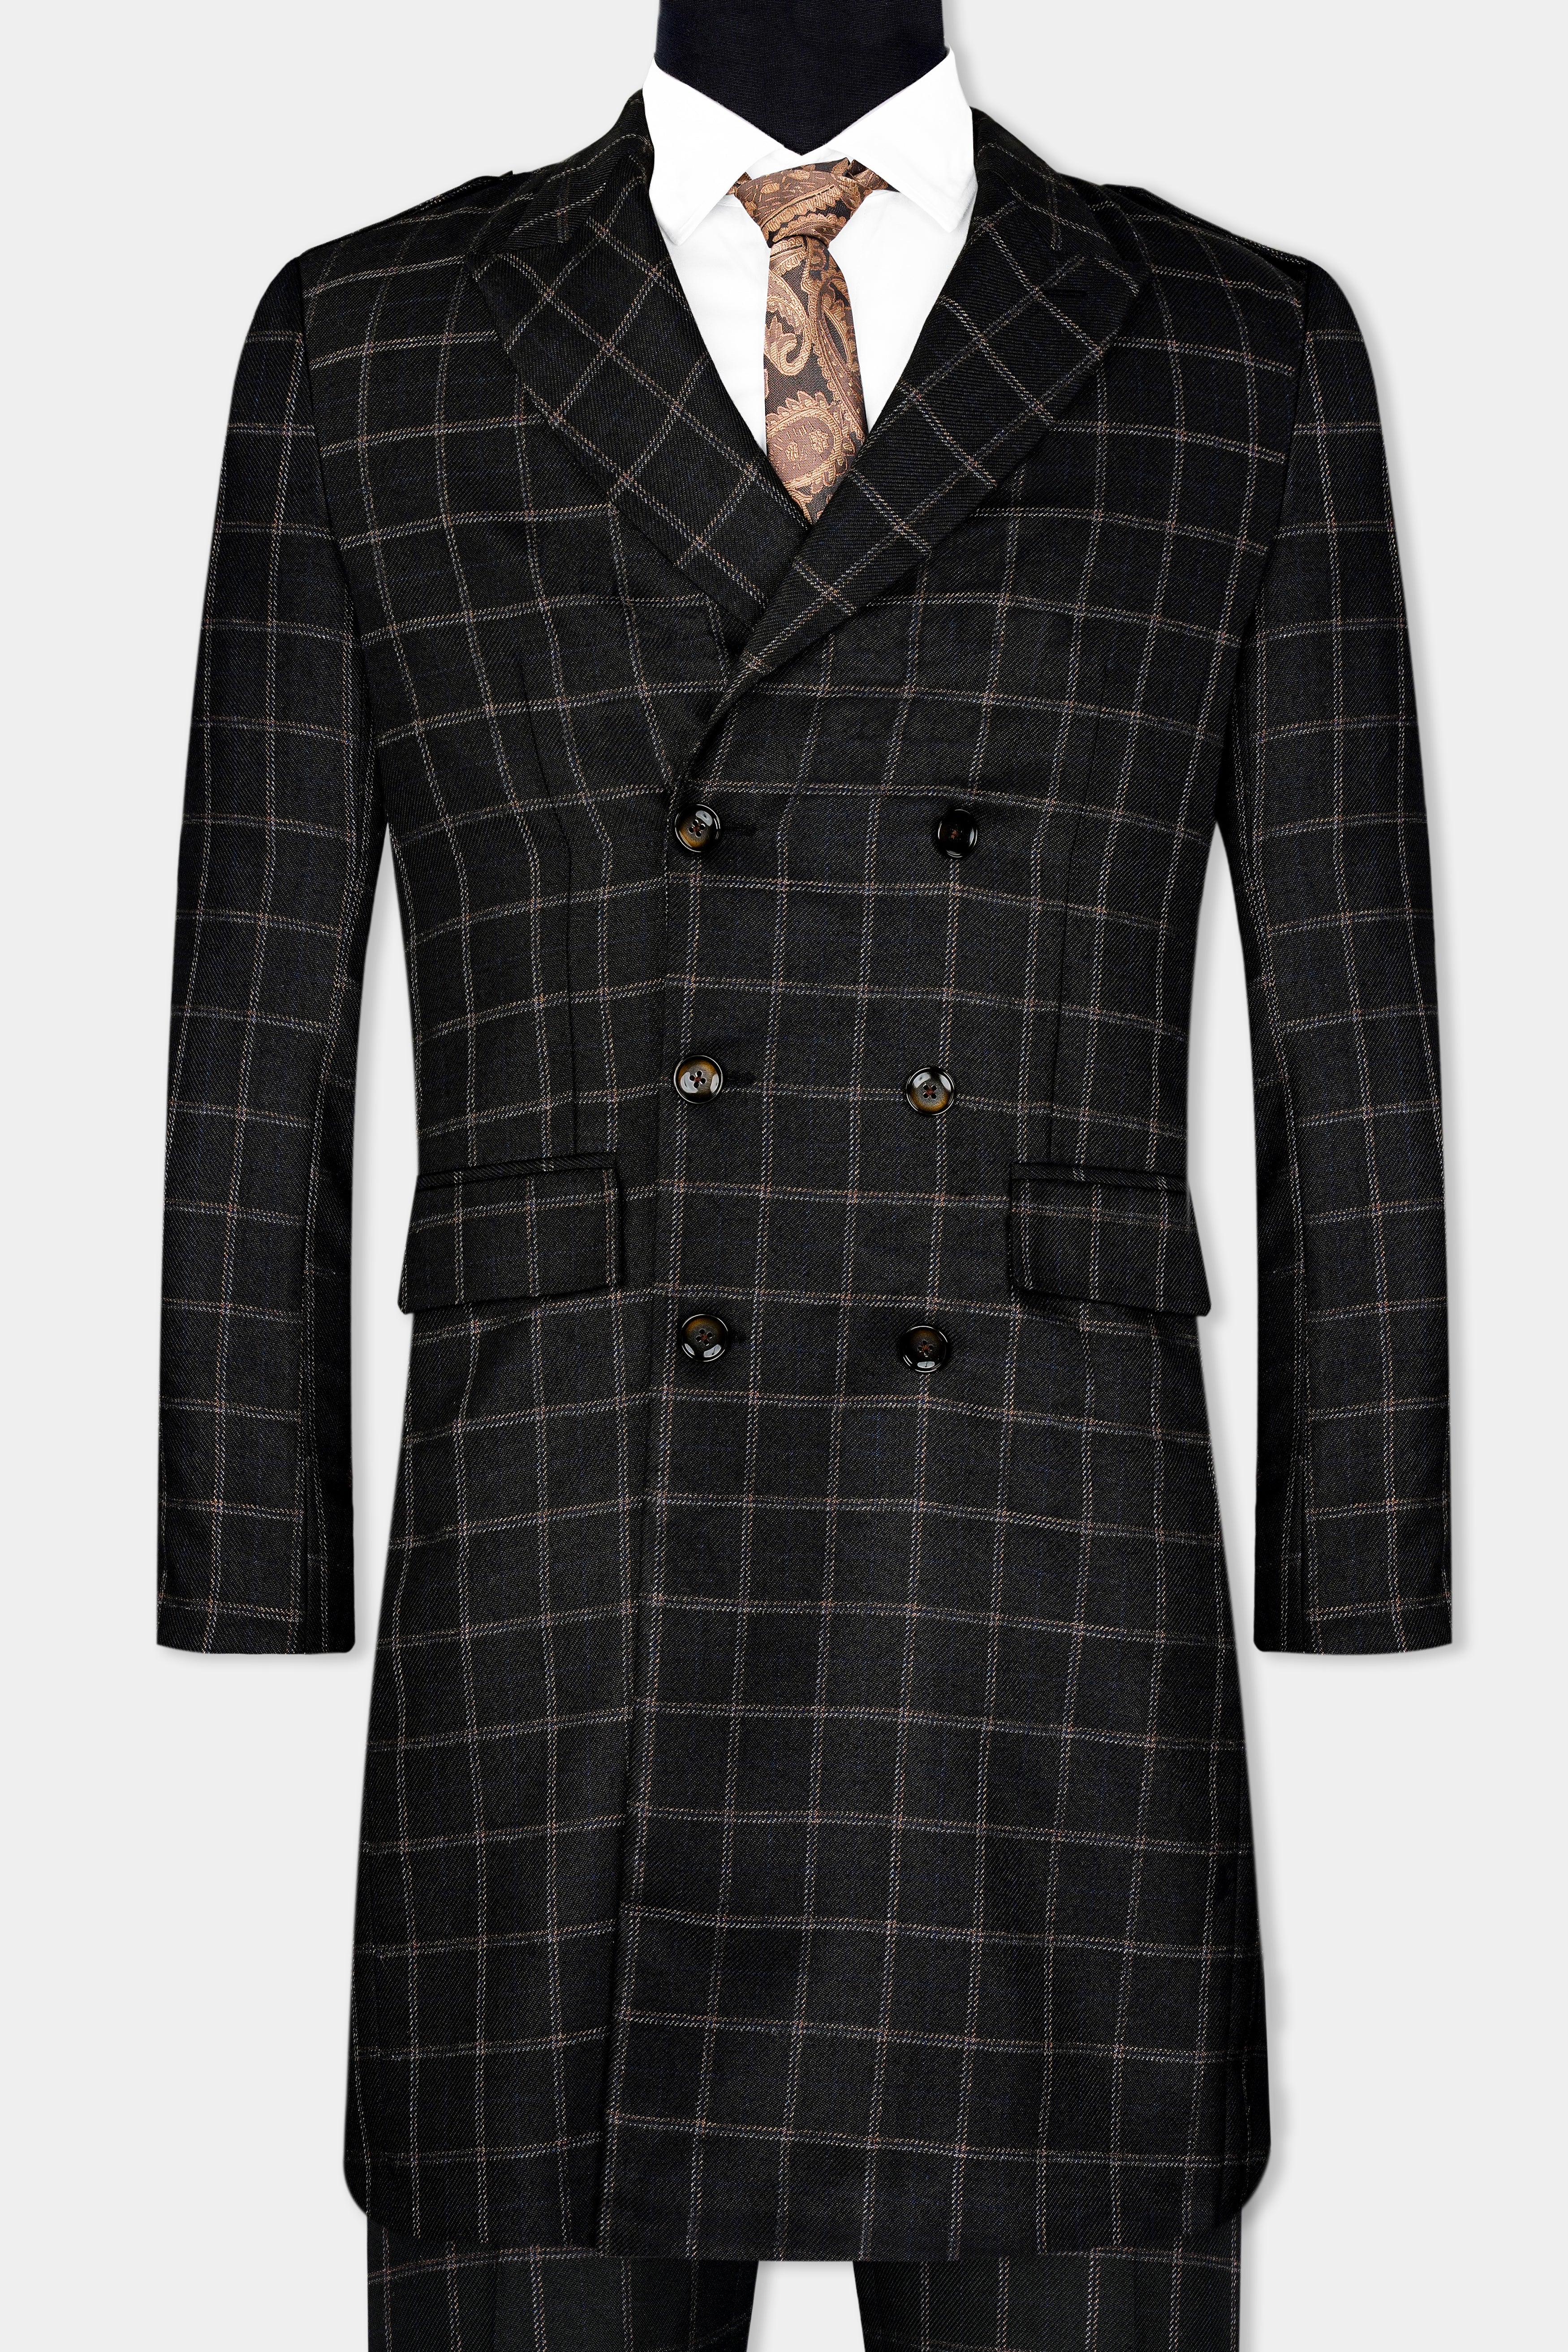 Jade Black and Saddle Brown Windowpane Tweed Trench Coat With Pant TCPT2920-DB-D202-36, TCPT2920-DB-D202-38, TCPT2920-DB-D202-40, TCPT2920-DB-D202-42, TCPT2920-DB-D202-44, TCPT2920-DB-D202-46, TCPT2920-DB-D202-48, TCPT2920-DB-D202-50, TCPT2920-DB-D202-52, TCPT2920-DB-D202-54, TCPT2920-DB-D202-56, TCPT2920-DB-D202-58, TCPT2920-DB-D202-60